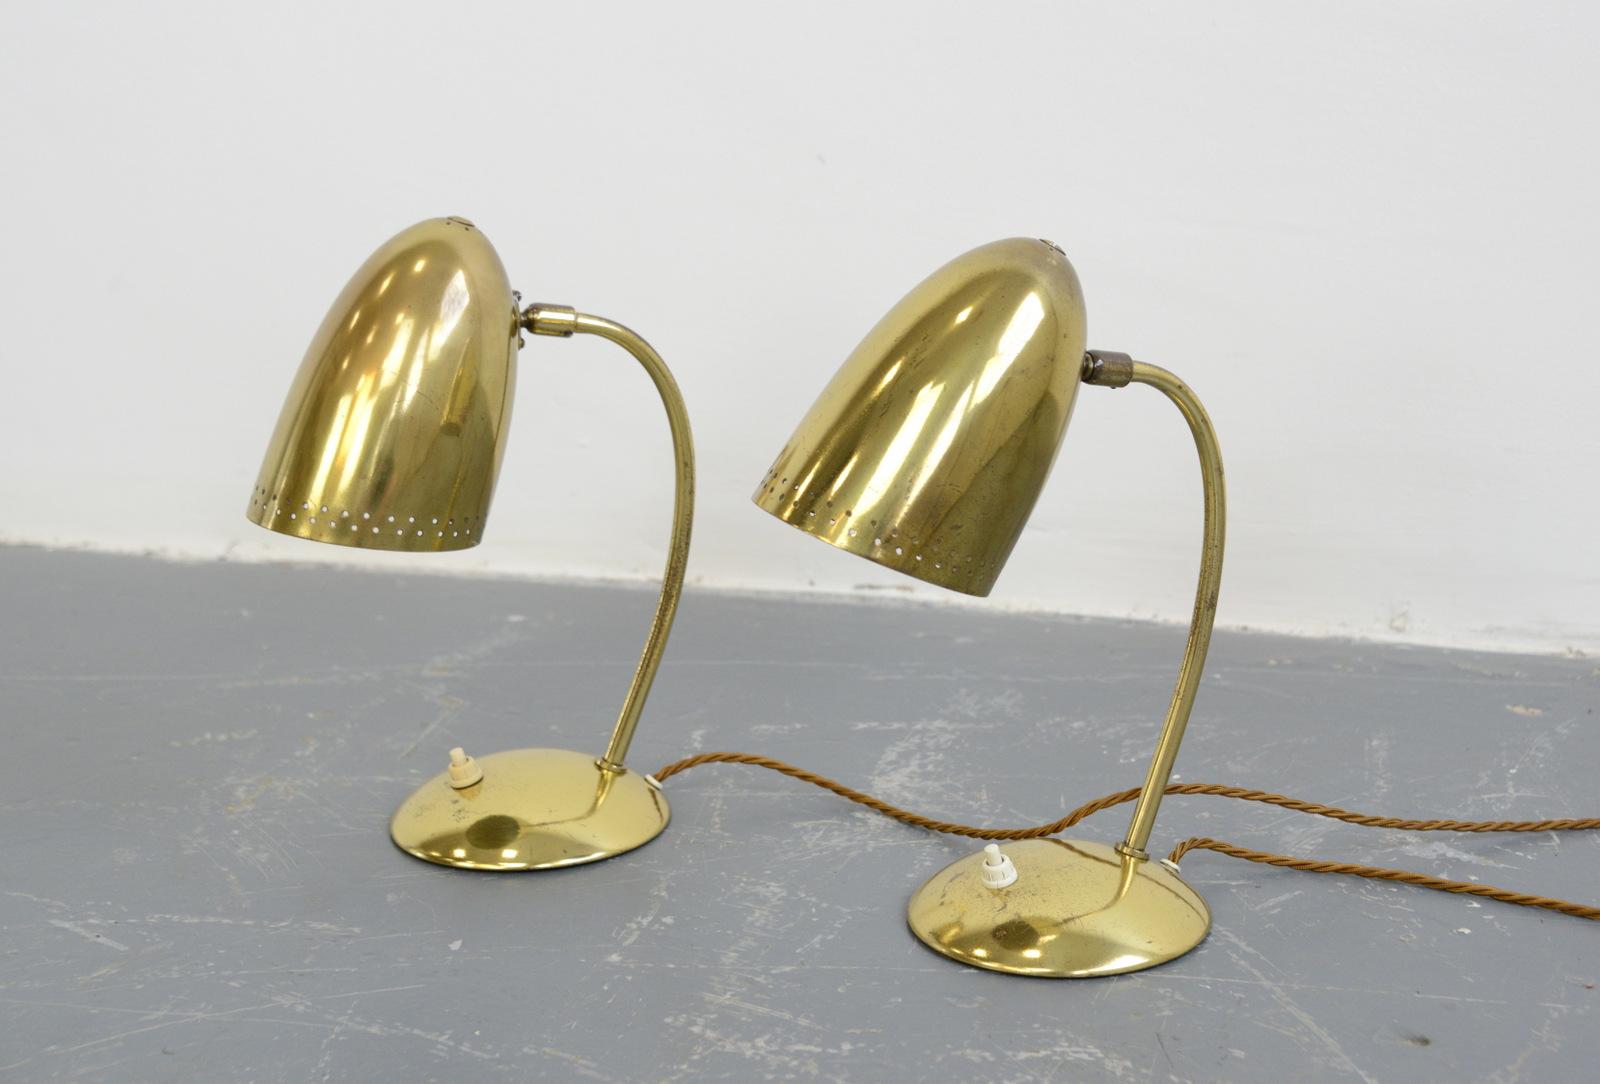 Bauhaus Model 4007 Table Lamps by Christian Dell for Kaiser Idell, circa 1930s